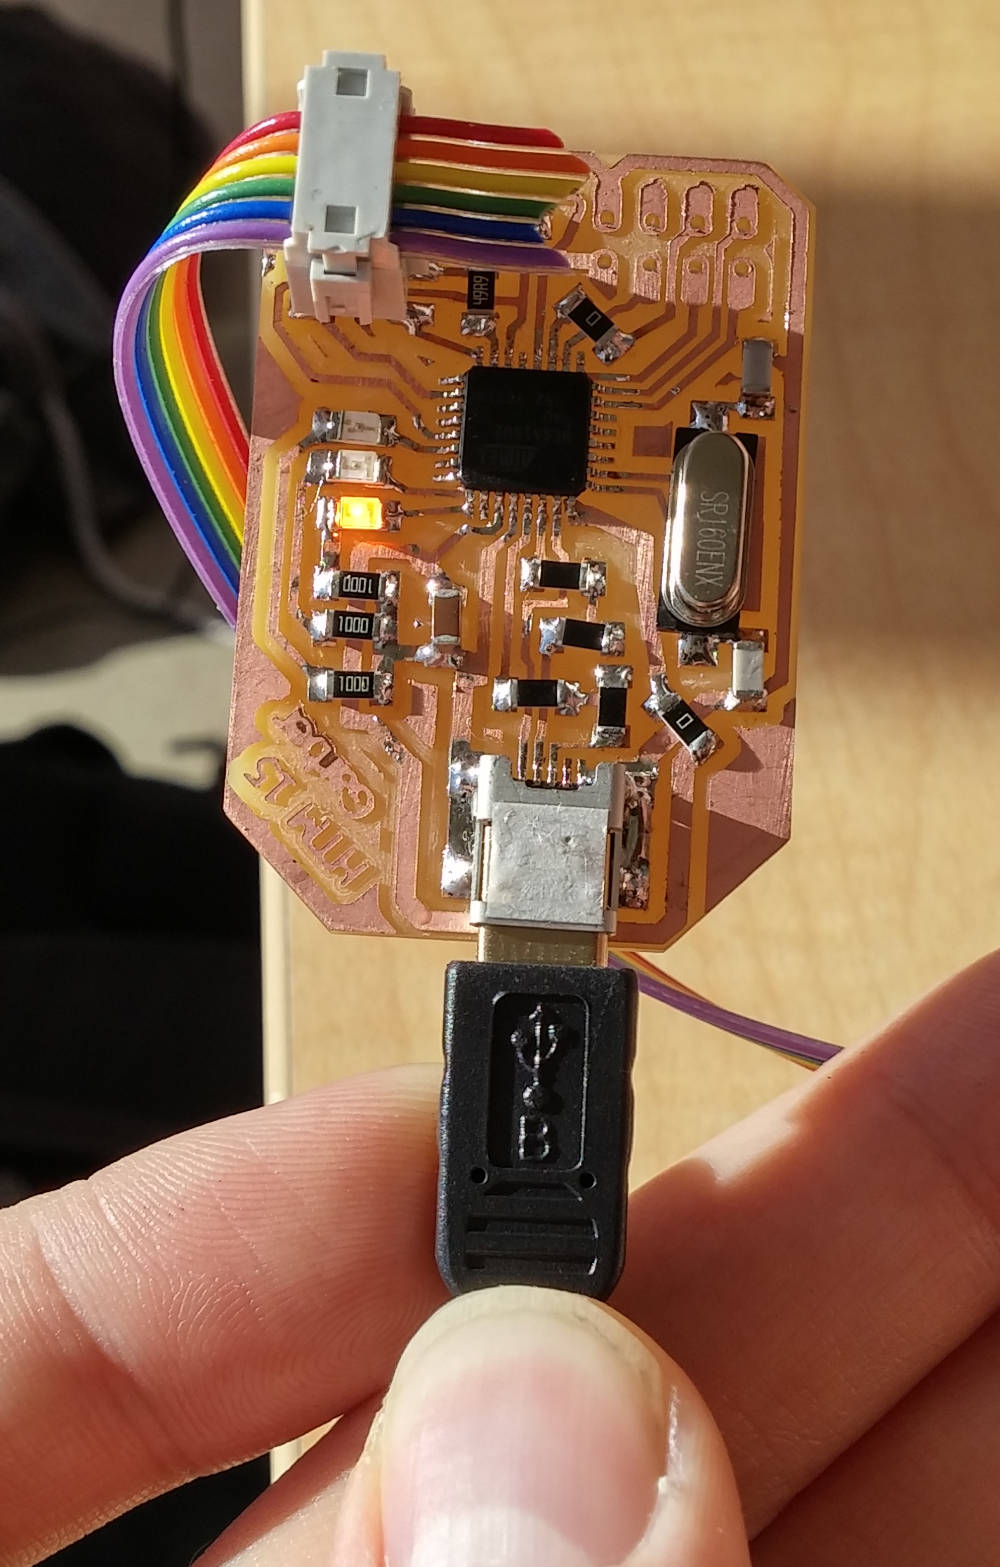 A photo of the LED on the USB board, showing that it's working